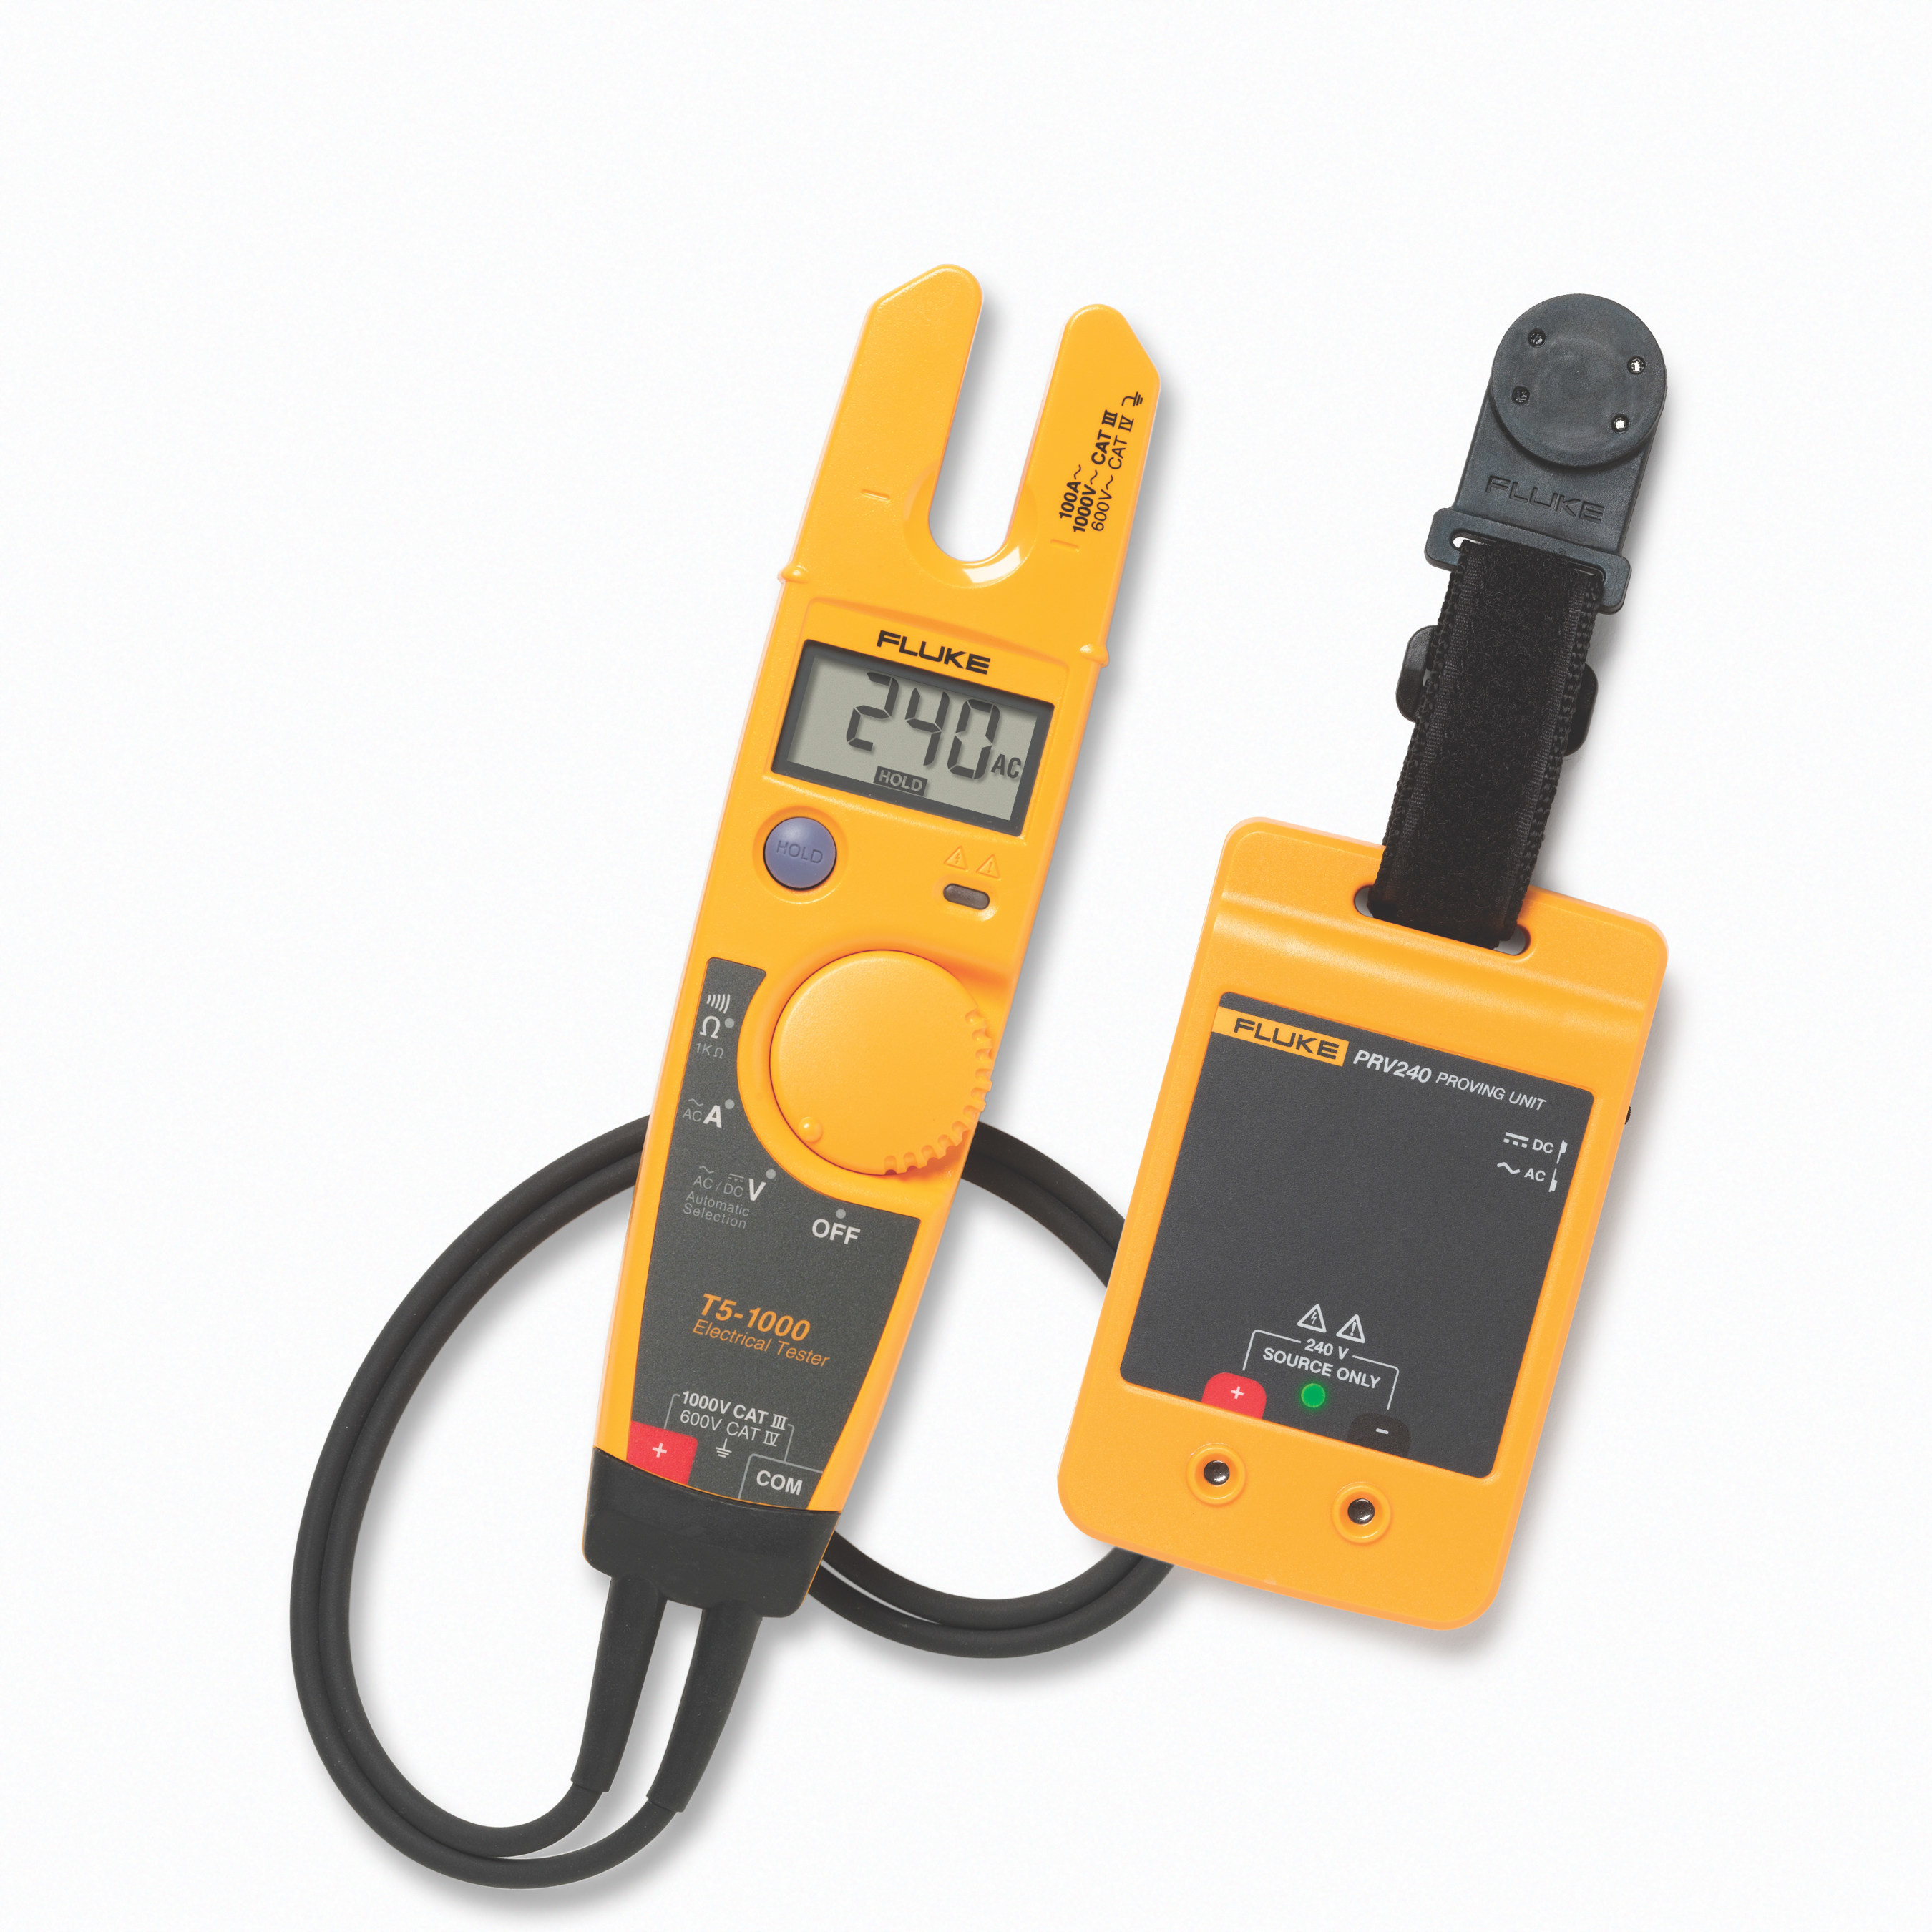 In contrast to using a known live source, using the PRV240 does not require personal protective equipment (PPE) for tester verification. Use of the PRV240 reduces the risk of shock and arc flash compared to verification of test instruments on high-energy sources in potentially hazardous electrical environments because the PRV240 provides a known voltage in a controlled, low-current state in accordance with safe work practices.